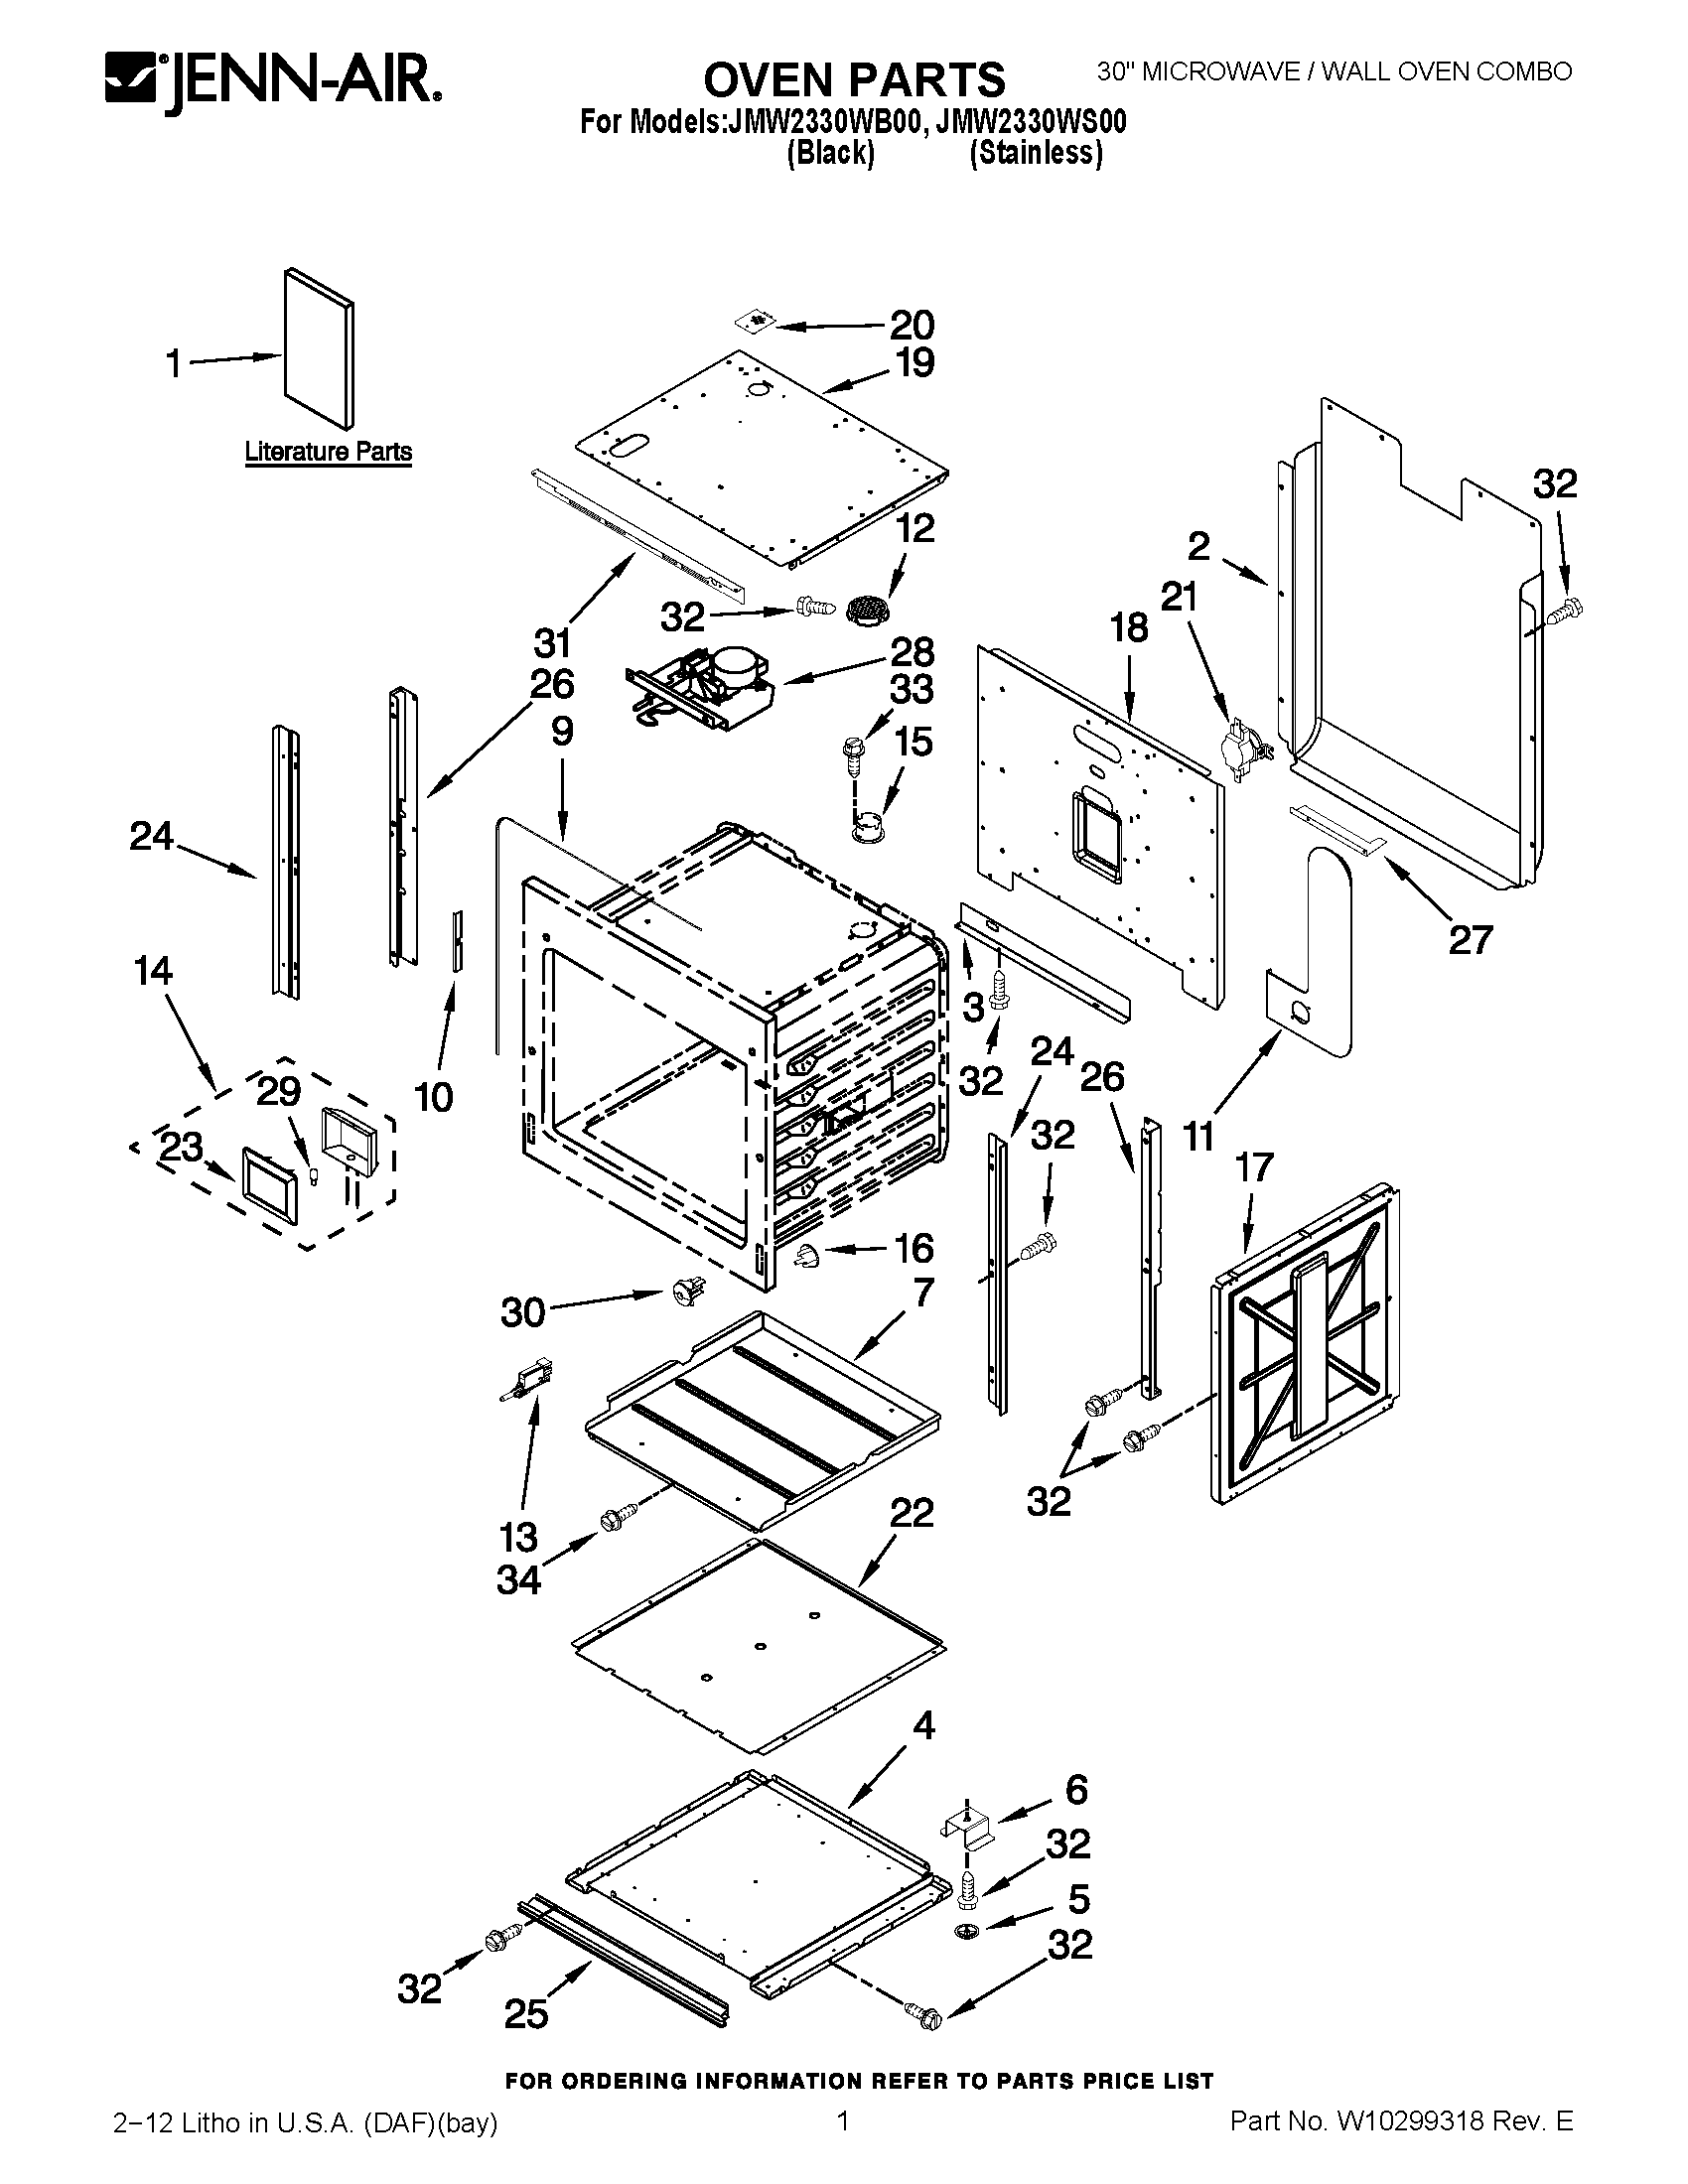 01 - OVEN PARTS